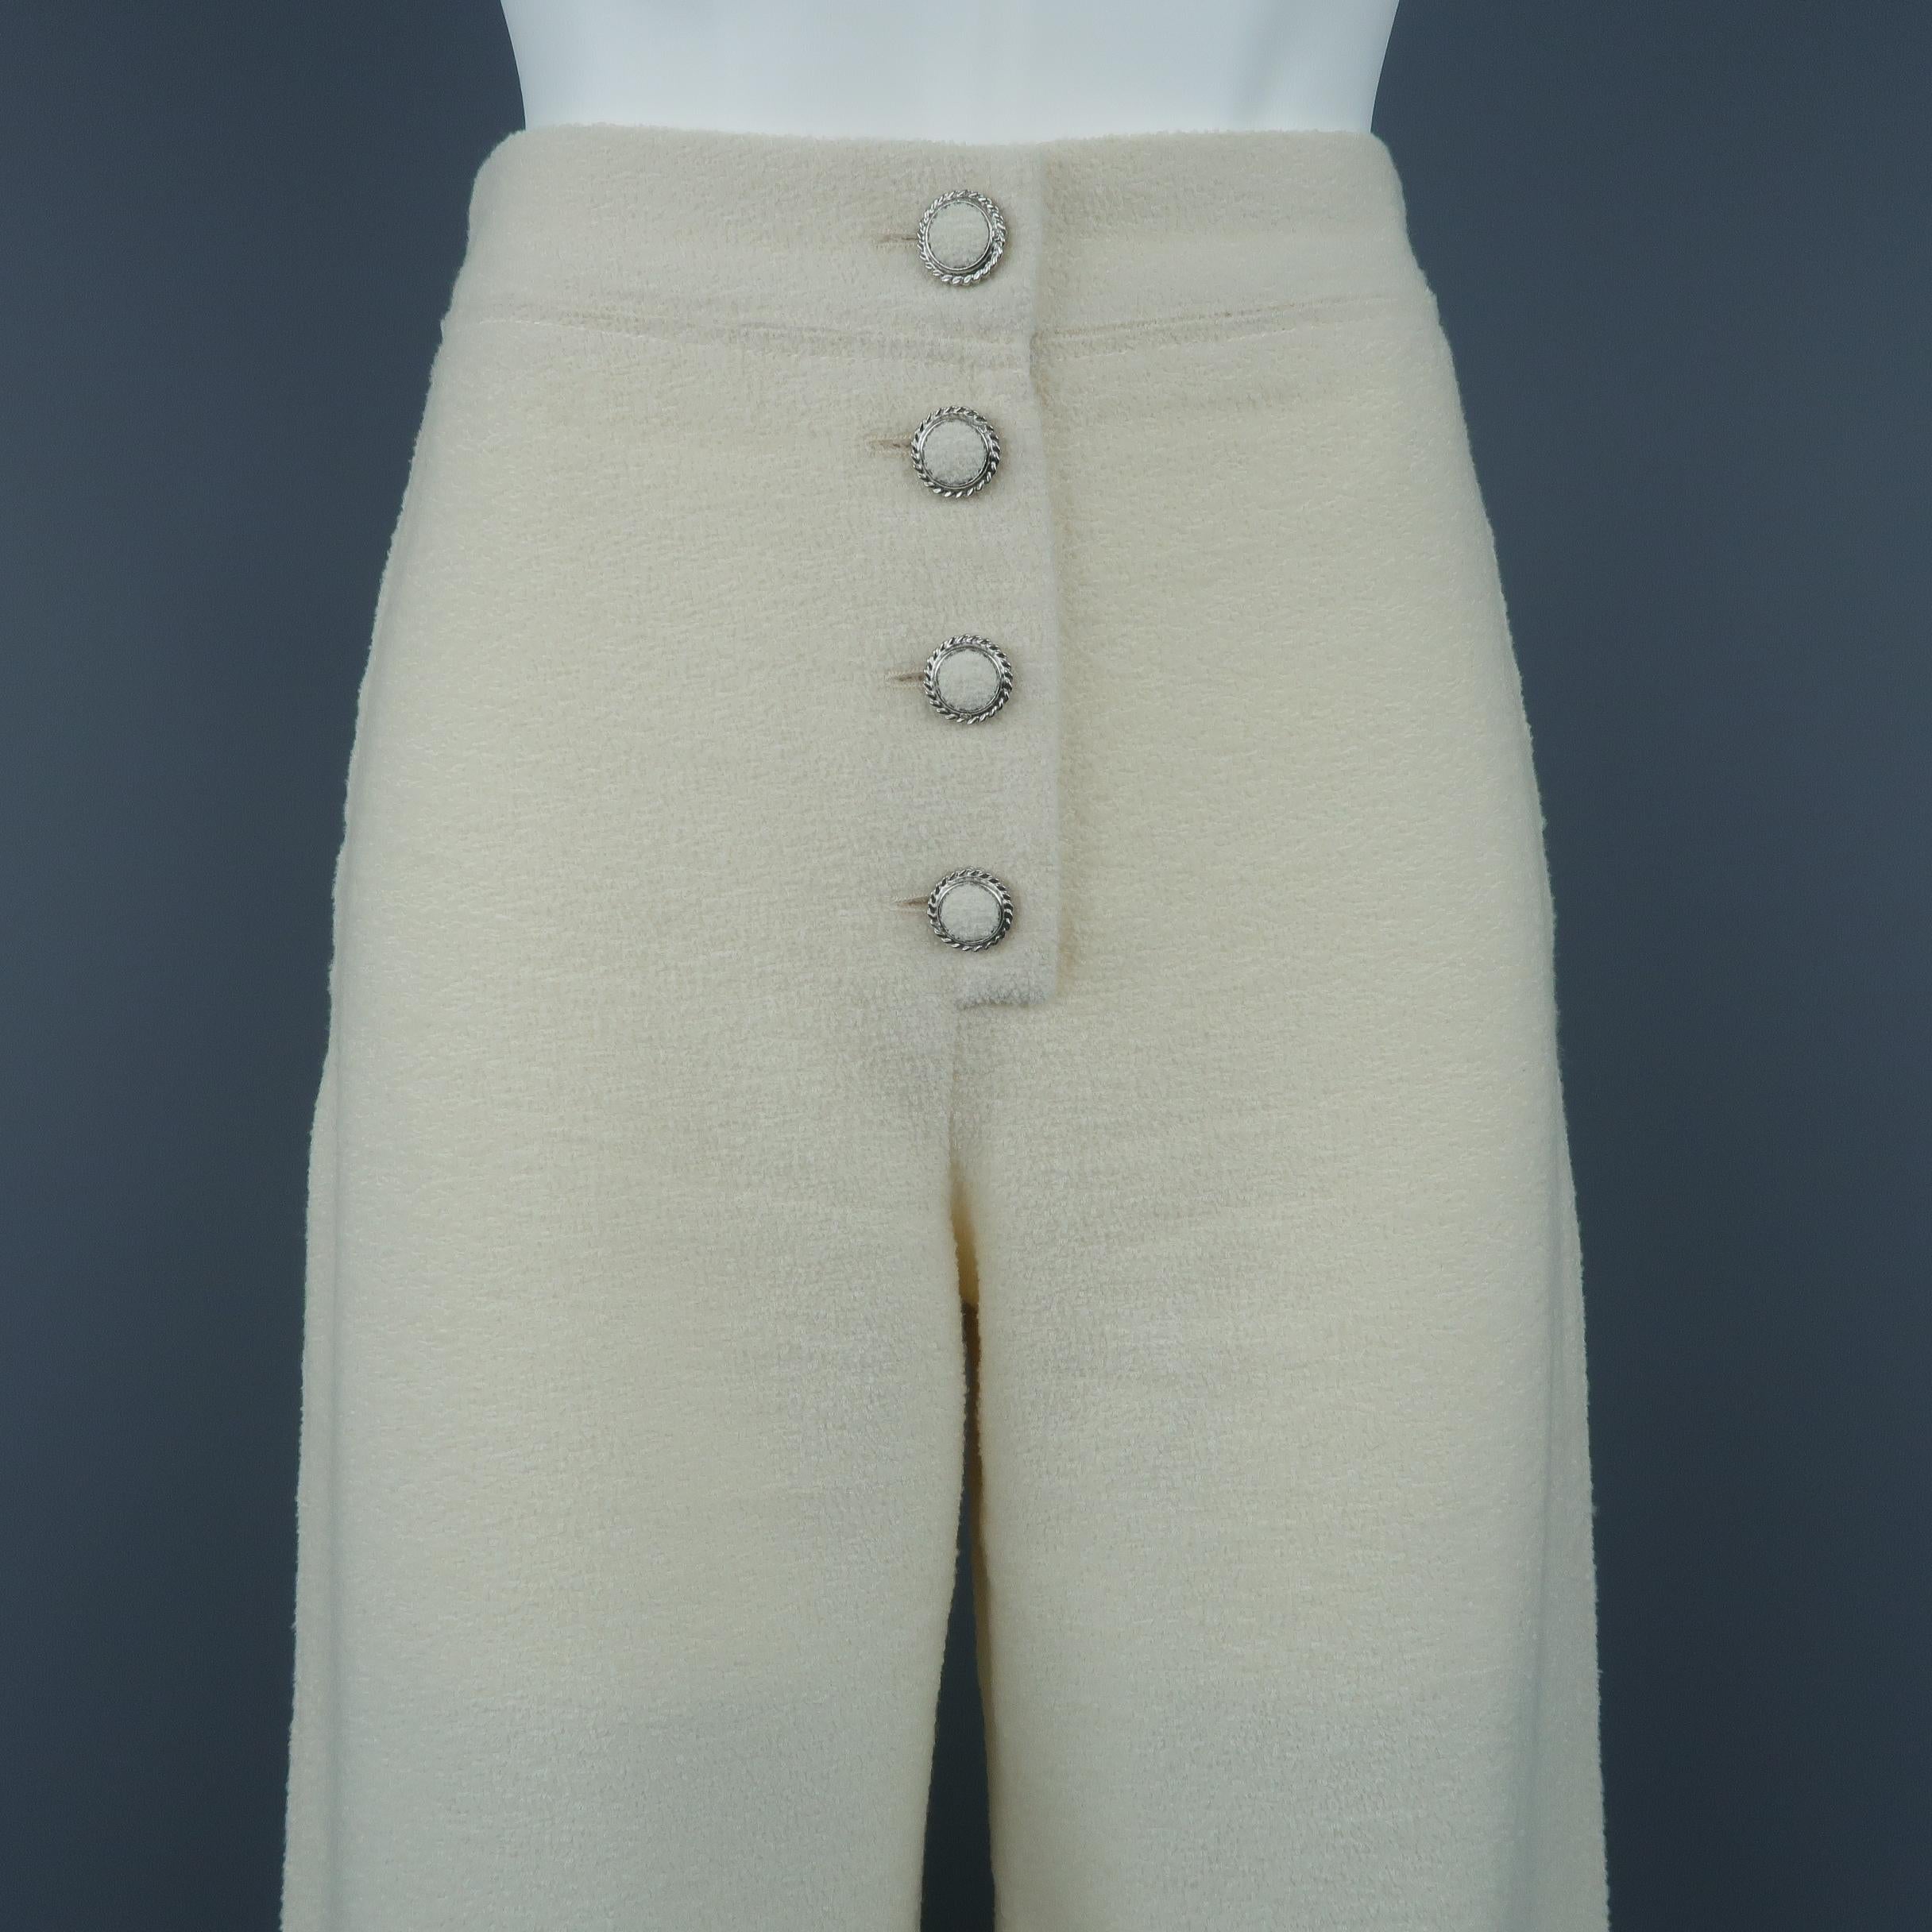 Chanel dress pants come in ivory cream wool tweed with a high rise, silver tone metal and fabric button fly, and wide leg. Matching cropped jacket available separately. Made in France.
 
Excellent Pre-Owned Condition.
Marked: FR 34
 
Measurements:
